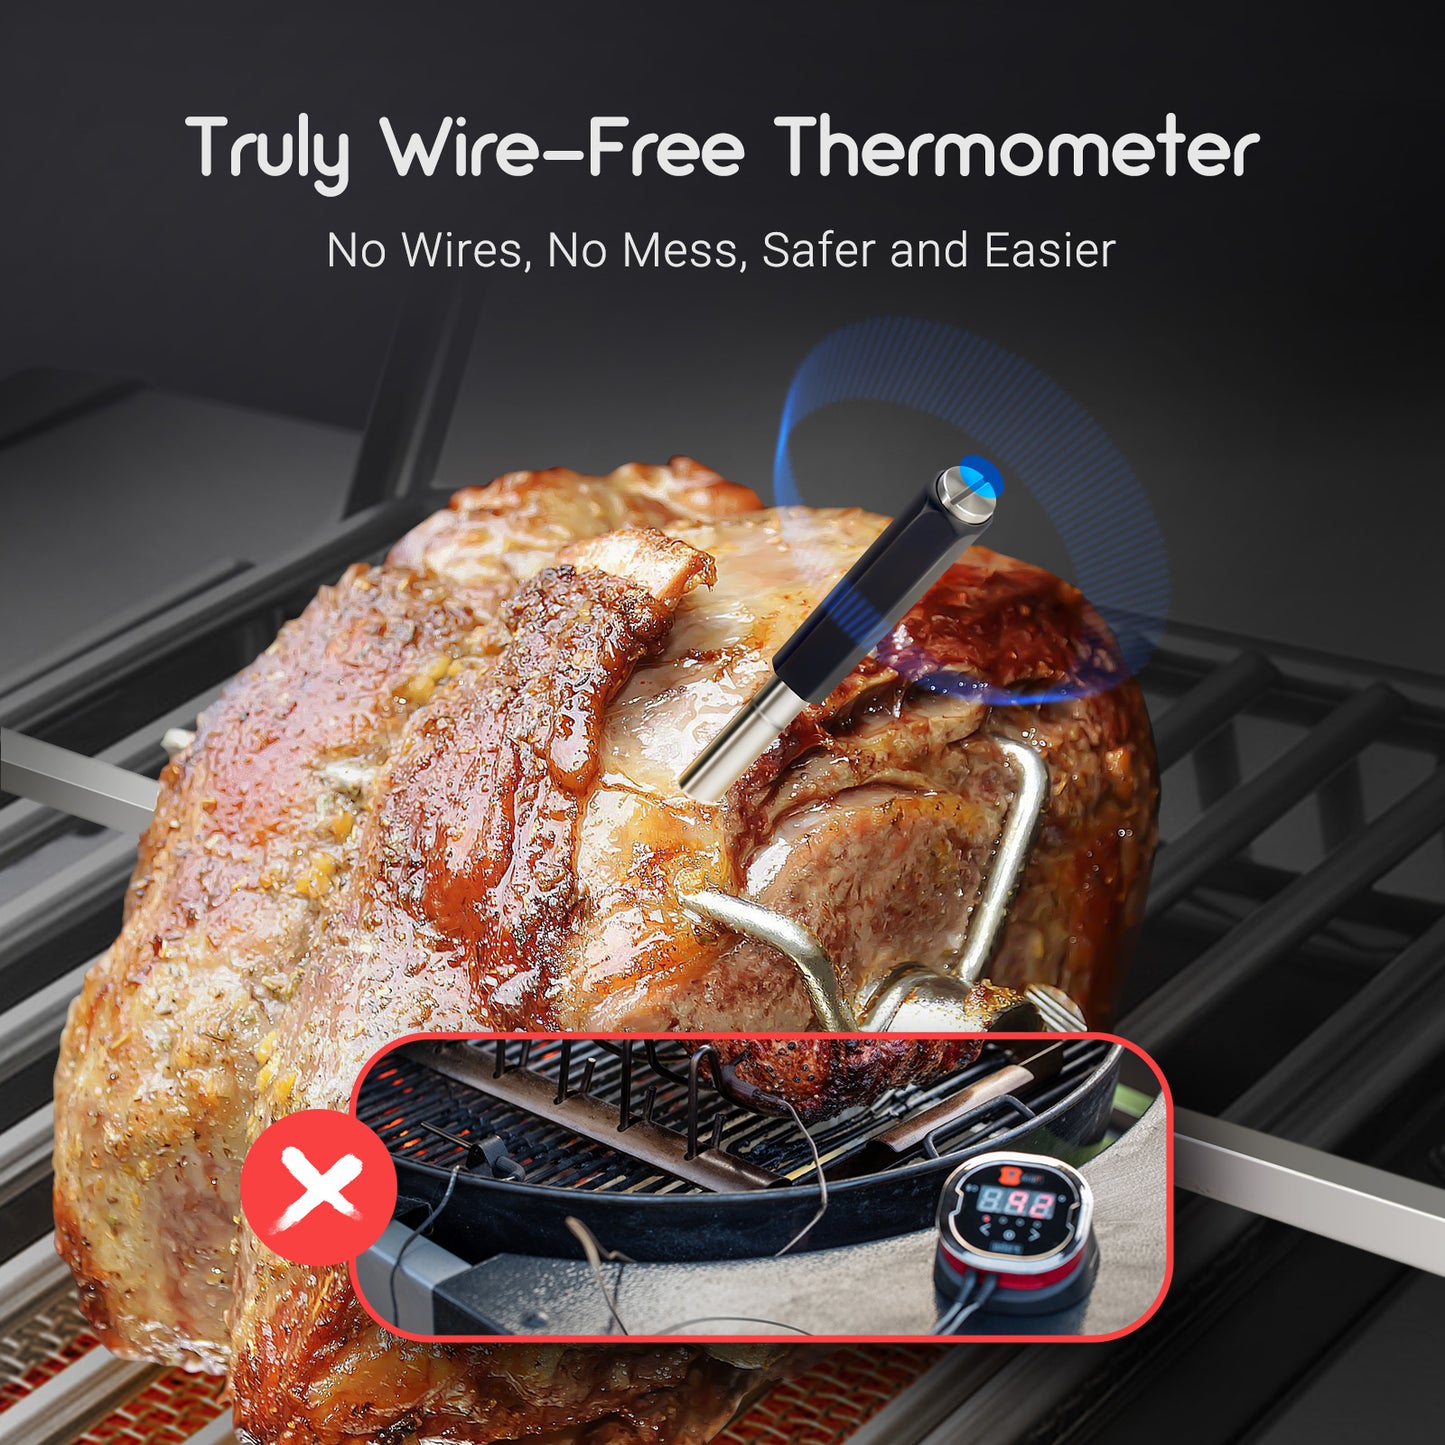 TEMPWISE MEAT THERMOMETER Truly Wire-free BBQ Thermometer, Bluetooth 5.0 Meat Thermometer for Oven, Smoker, Grill, Sous Vide, IP67 Waterproof, APP Control